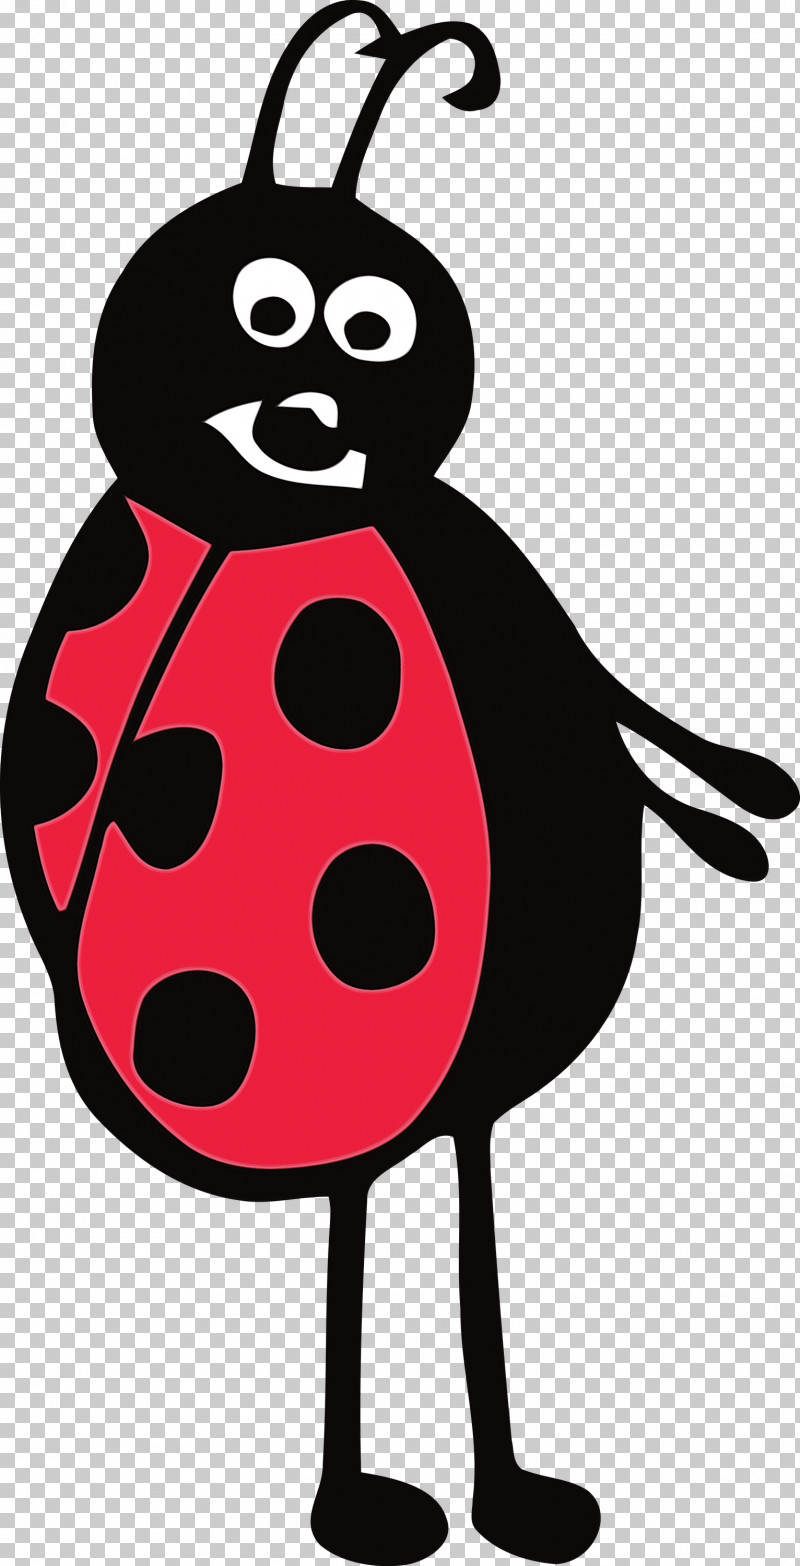 Insect Cartoon Science Biology PNG, Clipart, Biology, Cartoon, Insect, Ladybug, Paint Free PNG Download